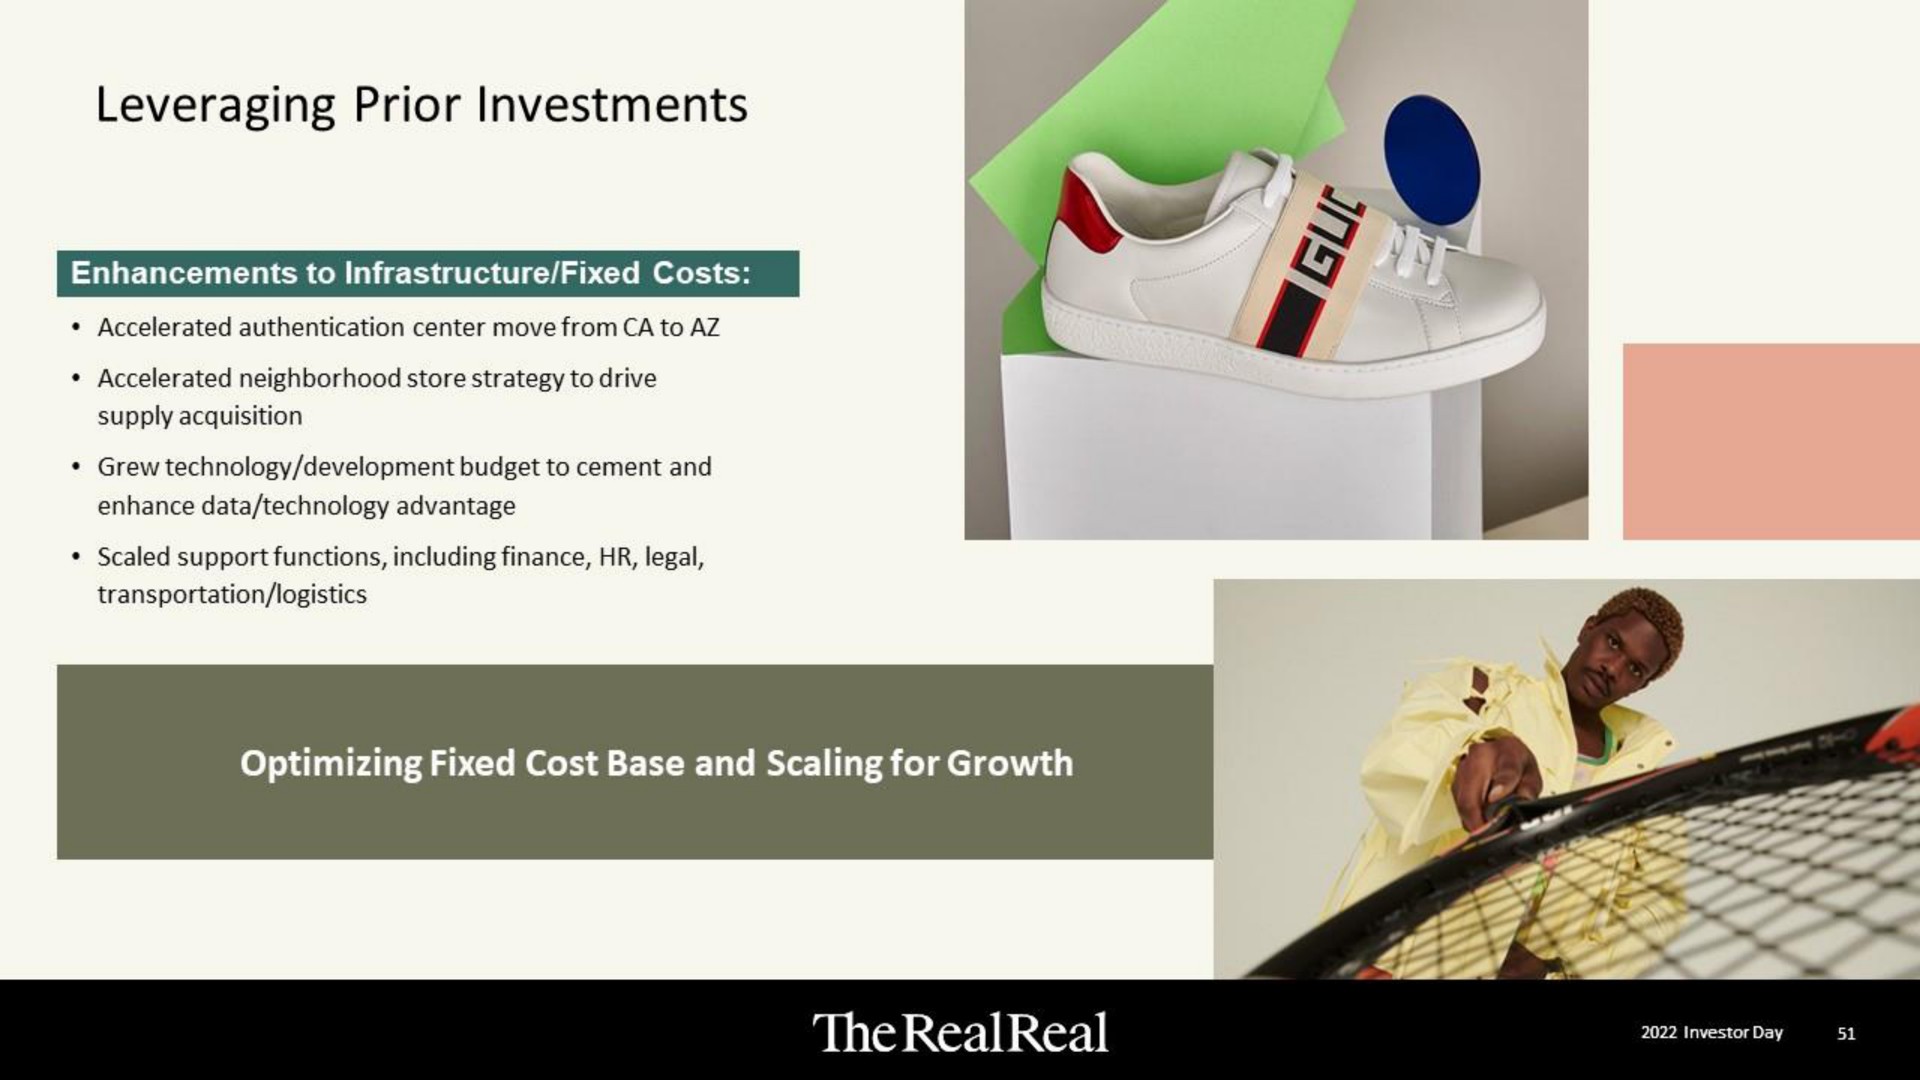 leveraging prior investments | The RealReal